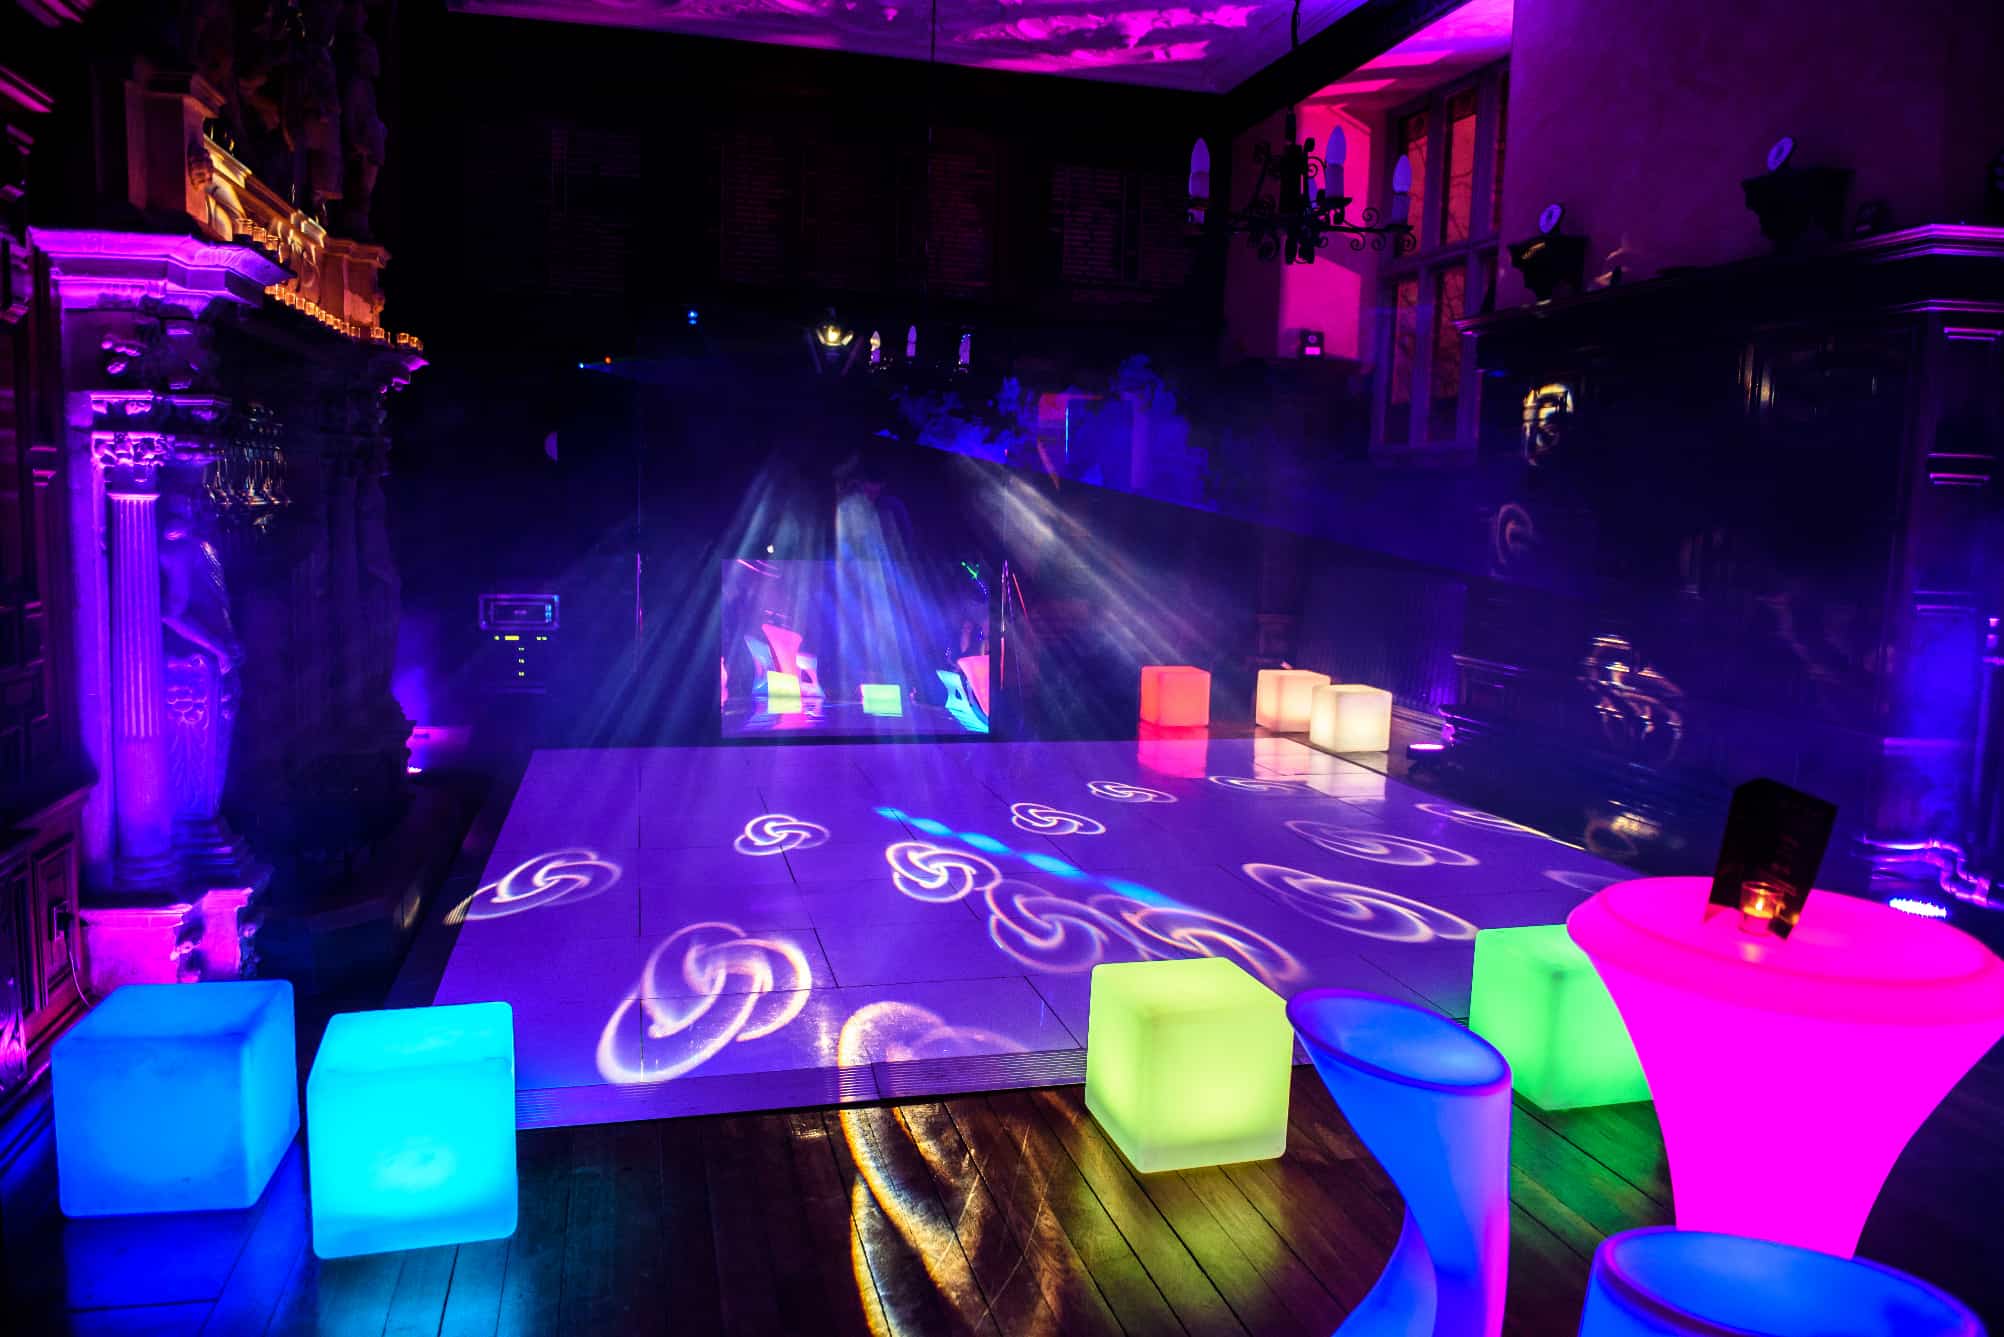 LED furniture and dance floor